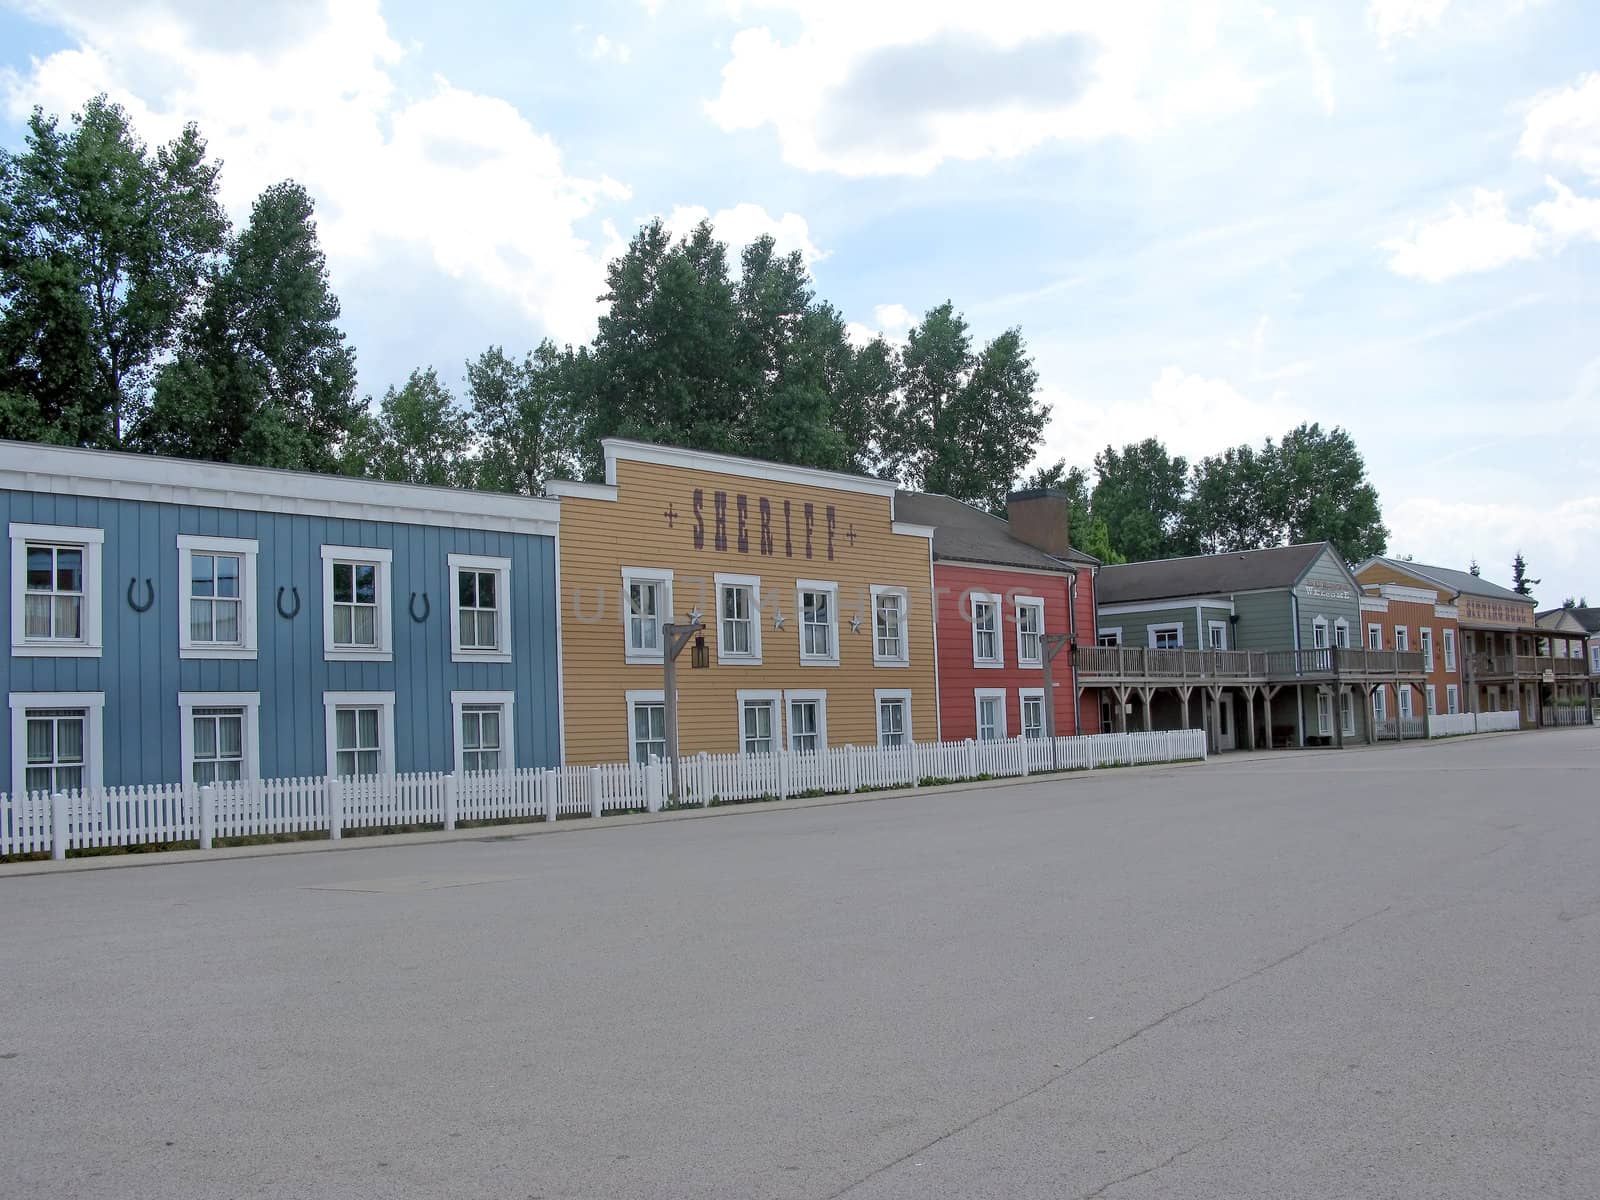 A deserted cowboy town, with wooden buildings.